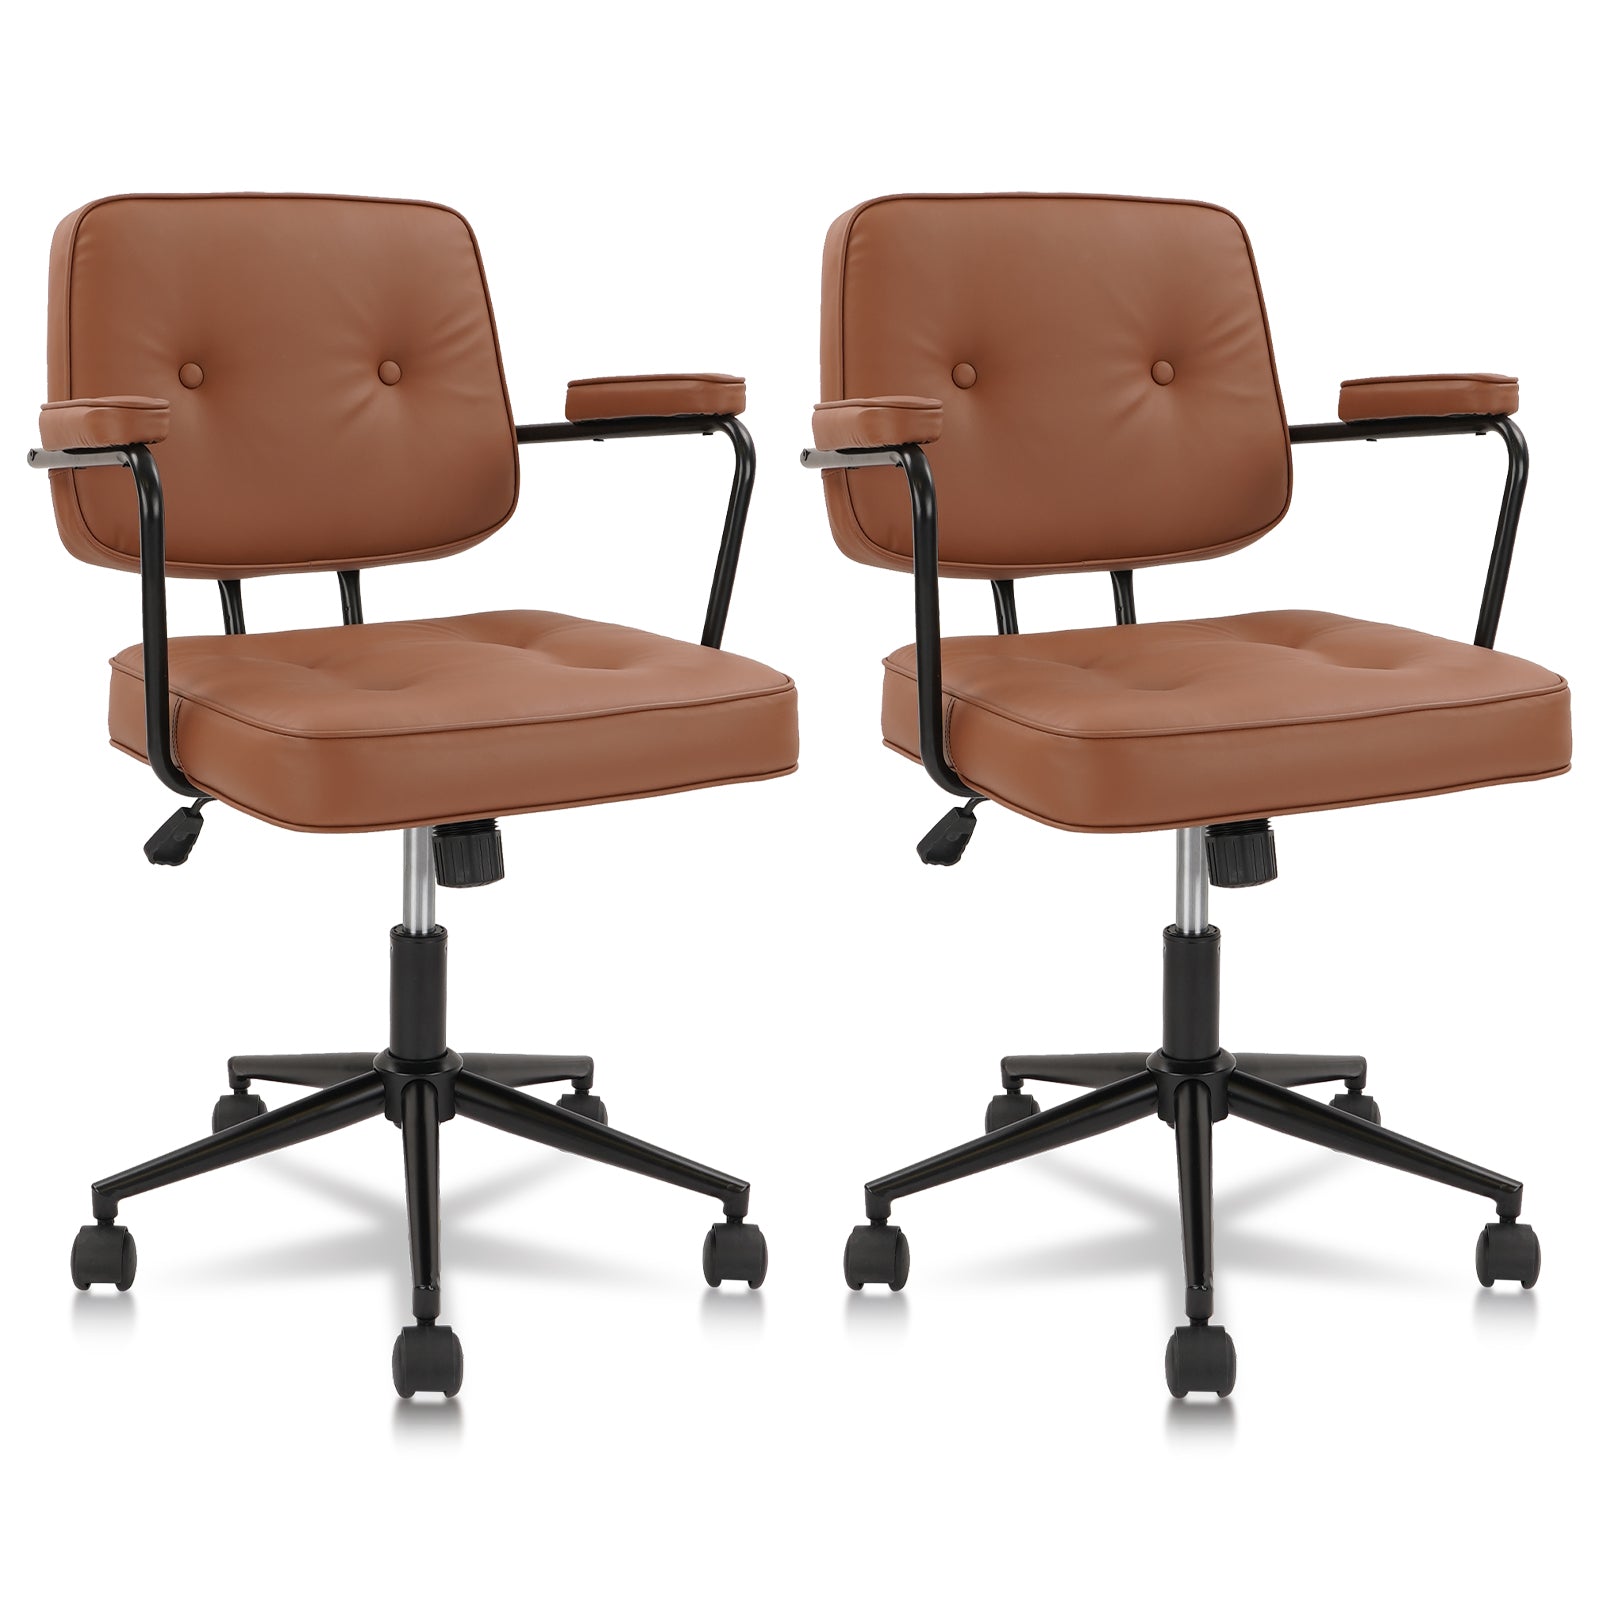 KLASIKA Leather Home Office Chair,Swivel Ergonomics Mid Back Desk Chair with Armrests Computer Task Chair Brown